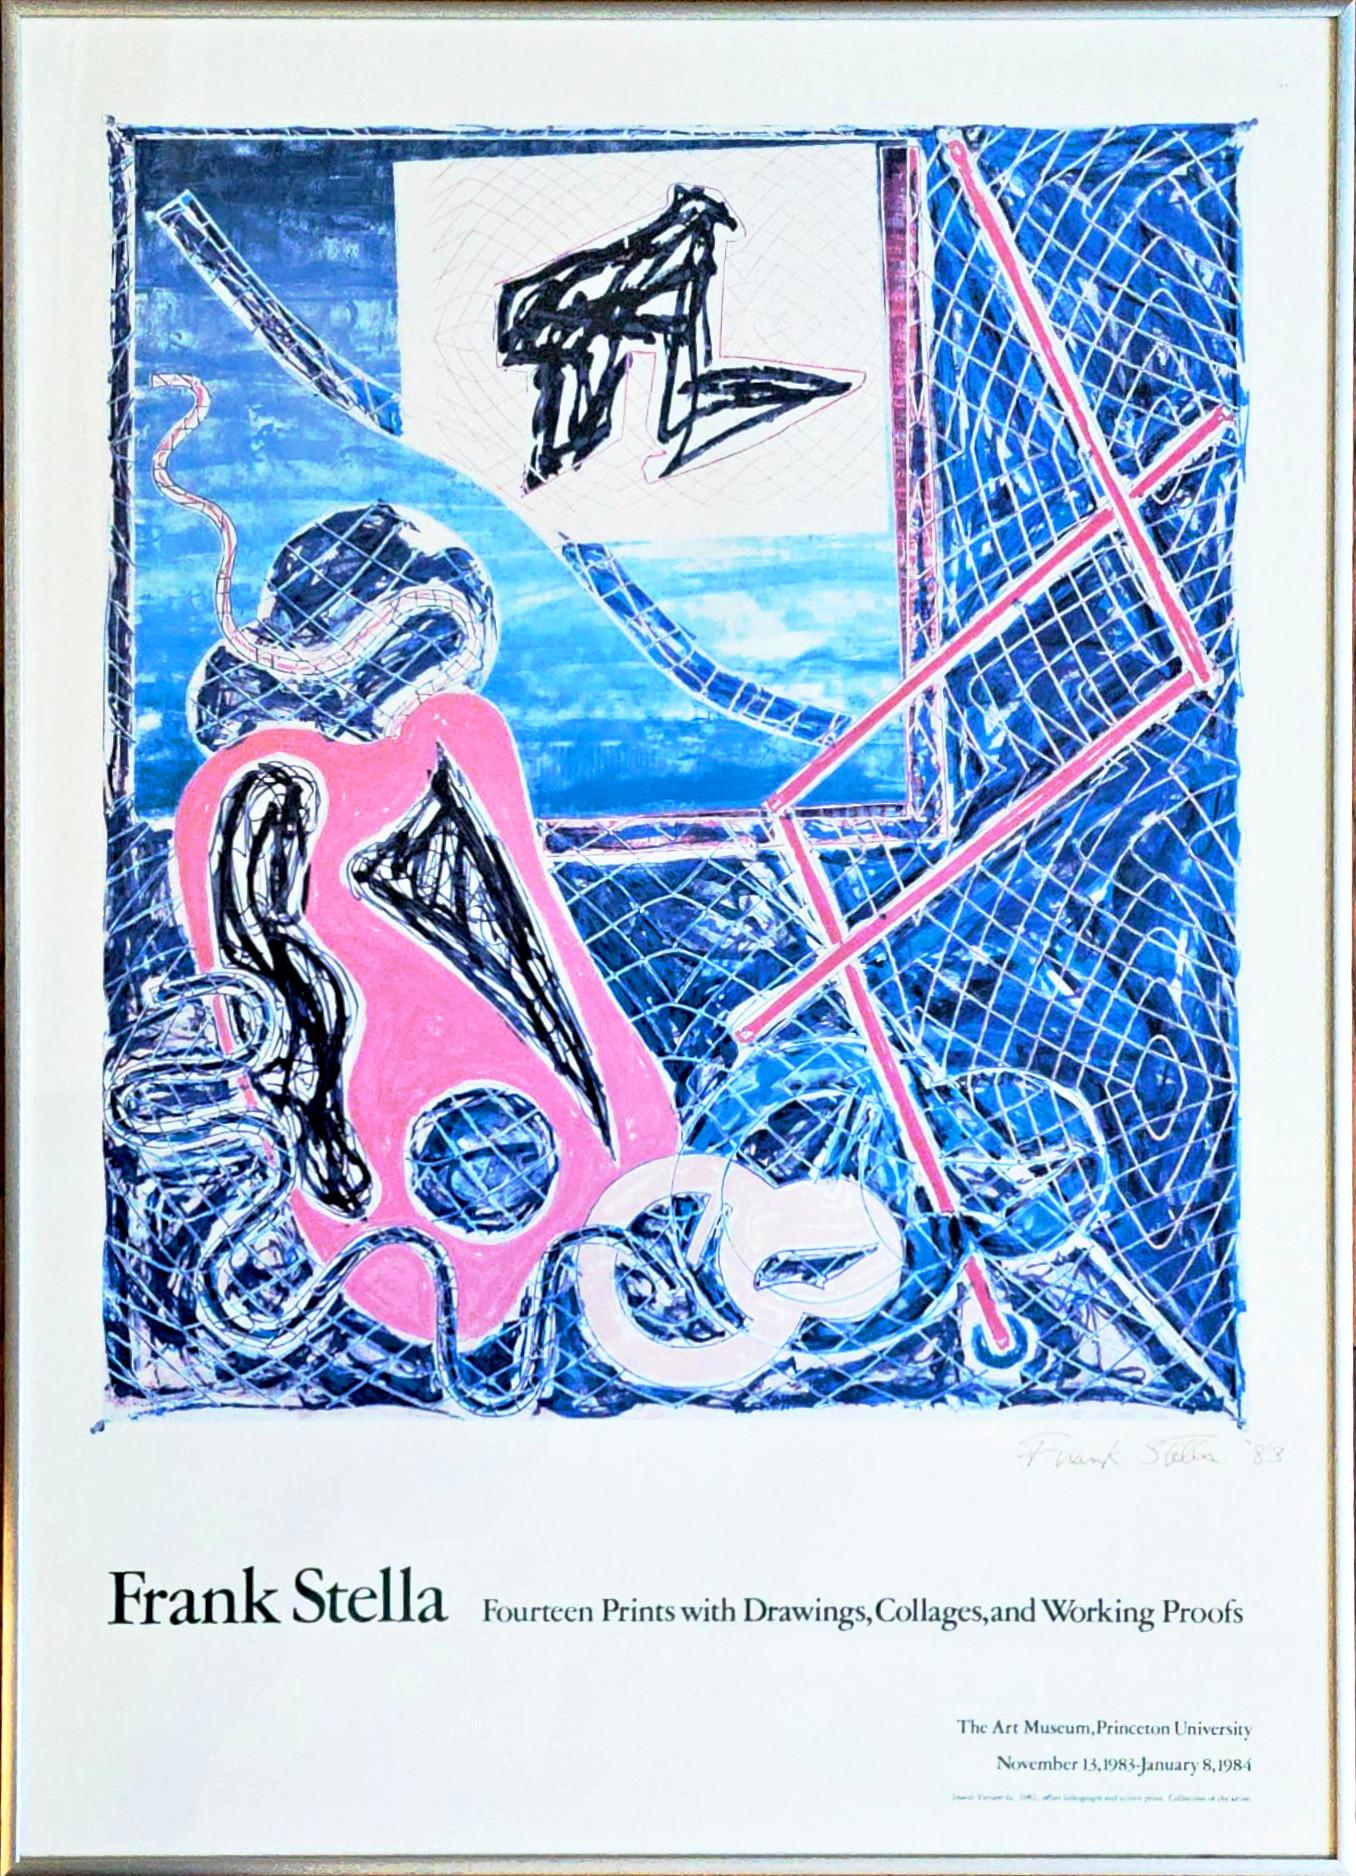 Frank Stella
Princeton Art Museum Poster (Hand signed and dated by Frank Stella), 1983
Rare limited edition - exact number printed unknown - collectors item 
Offset lithograph poster (hand signed and dated by Frank Stella)
Hand signed and dated '83